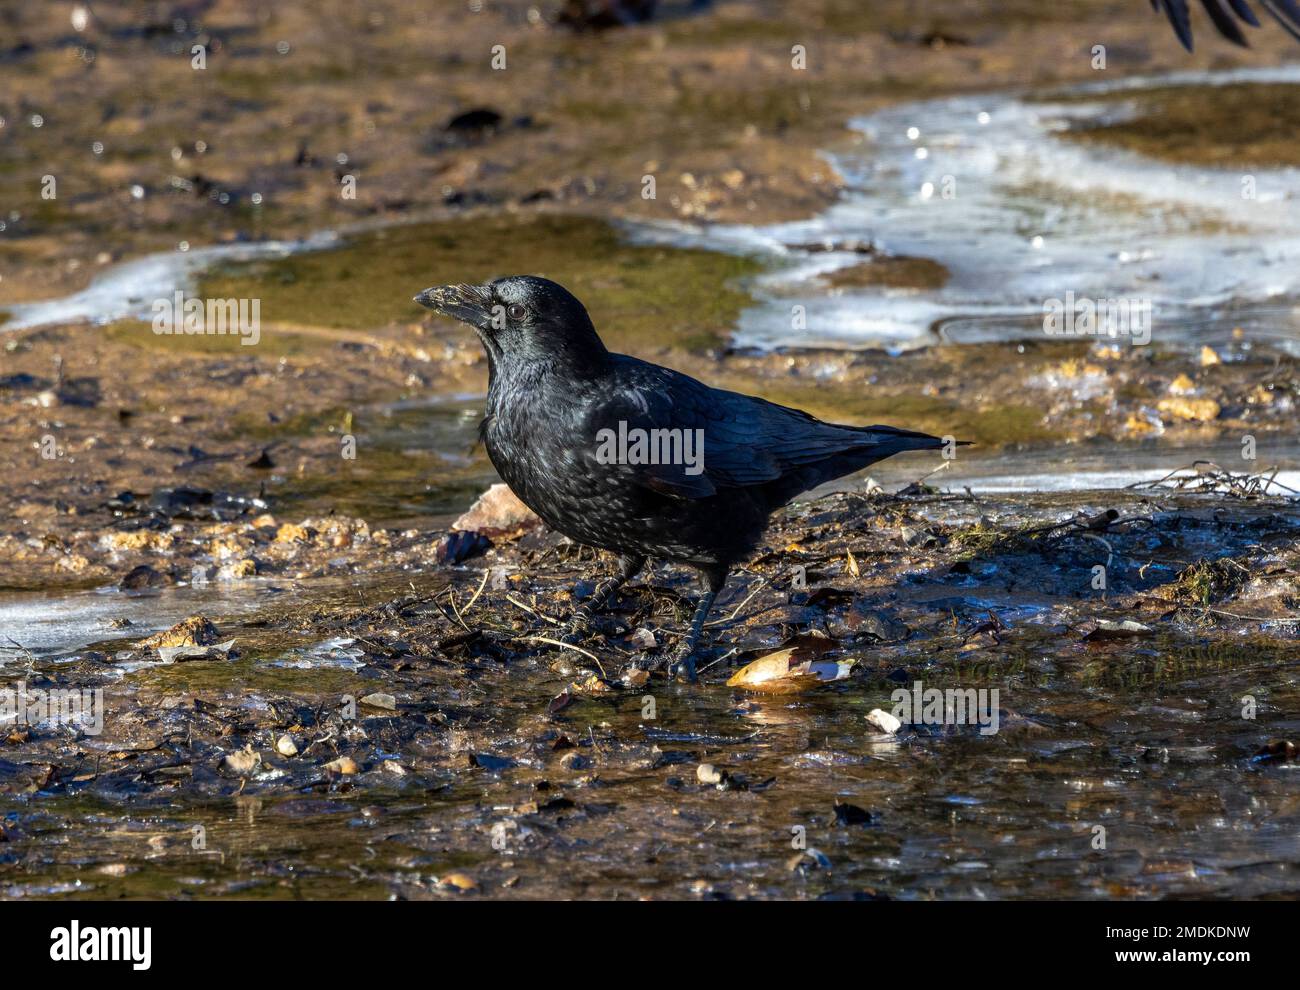 A Carrion Crow scavenges from the fringes of a frozen pond. These intelligent birds are quick to exploit any circumstances that will provide food. Stock Photo